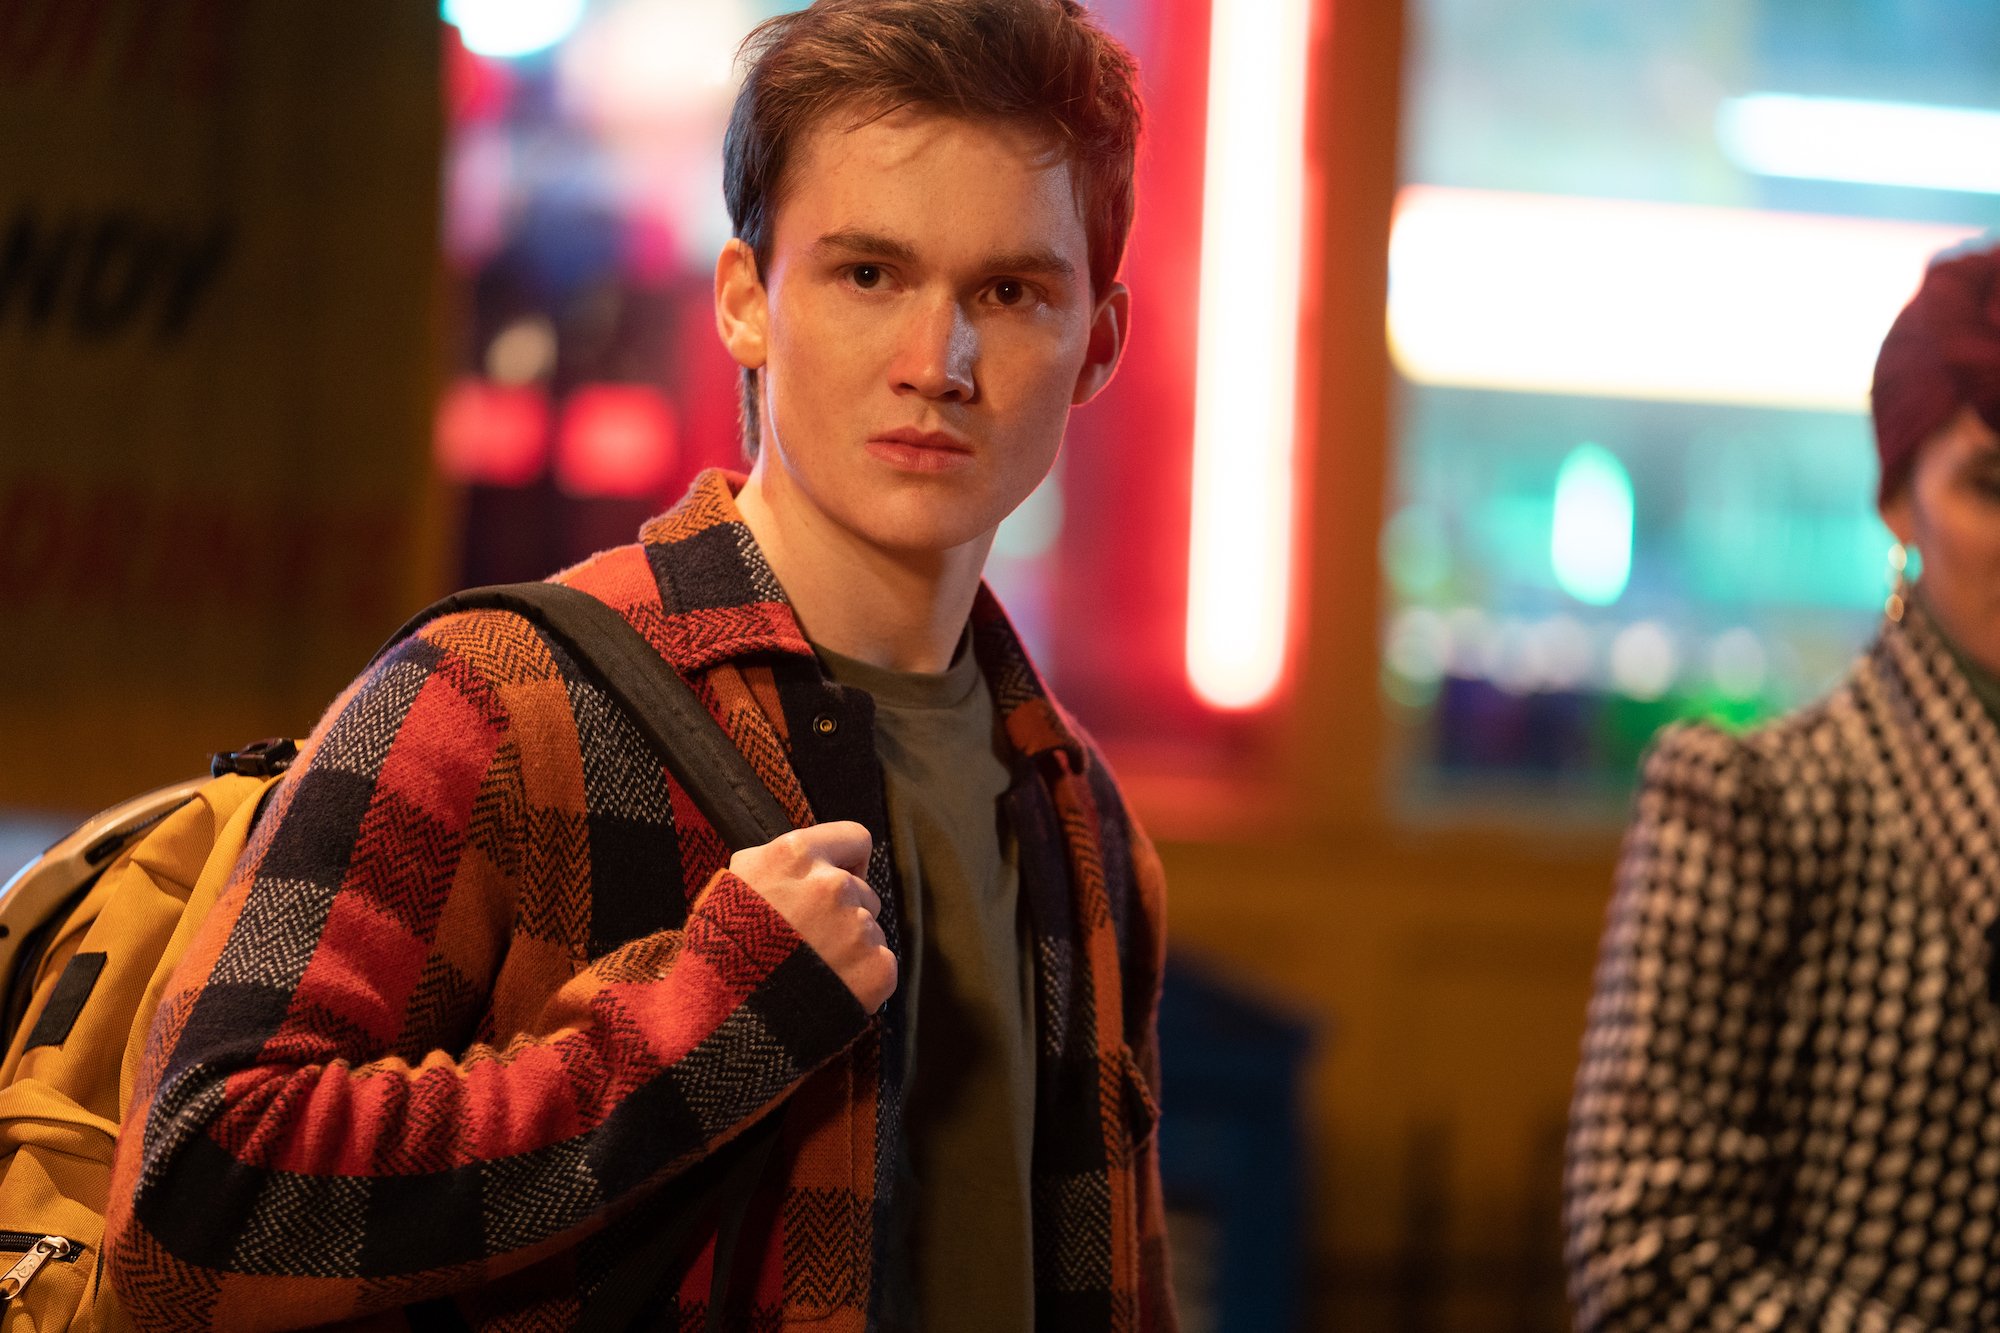 Matt Lintz, in character as Bruno in 'Ms. Marvel' on Disney+, wears a red and black plaid coat over a gray t-shirt and has a yellow backpack slung over his shoulder.